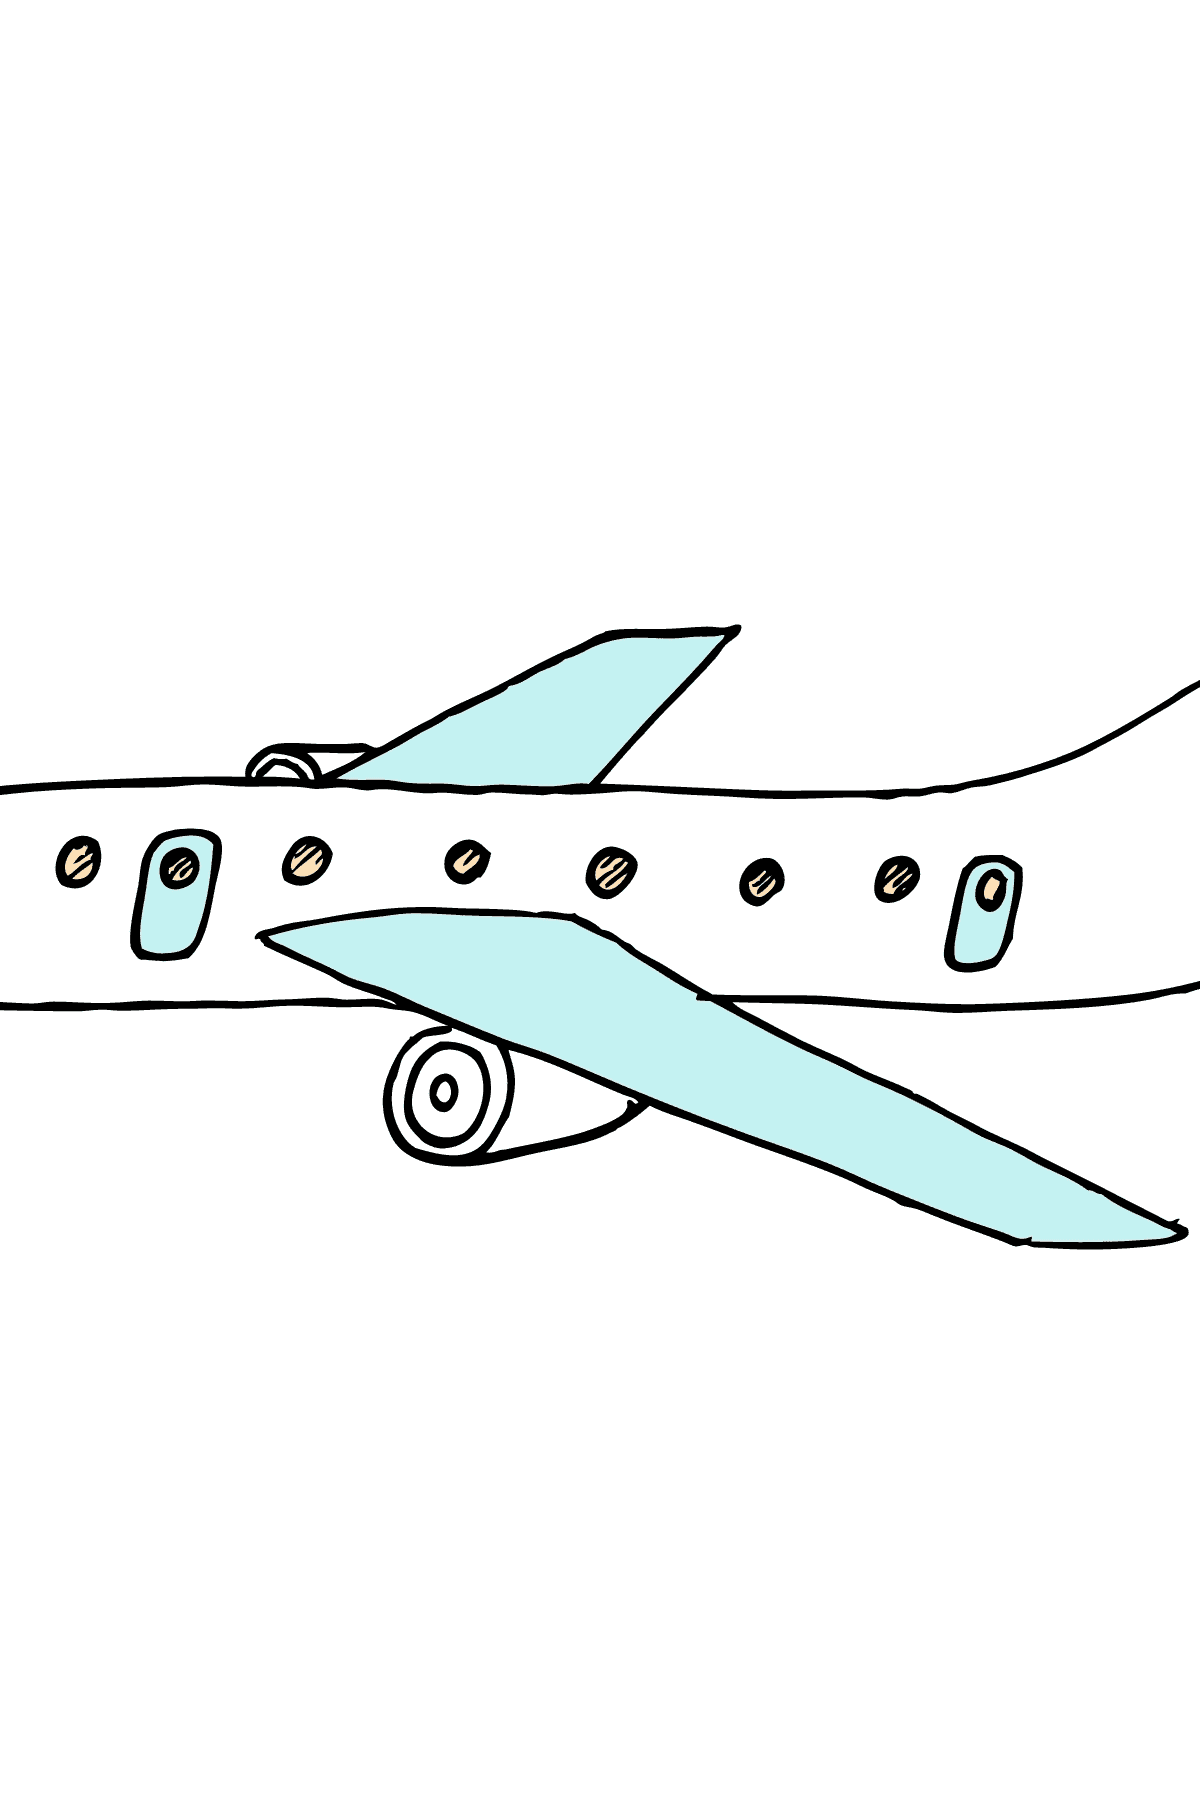 Coloring Page - A Commercial Jet - Coloring Pages for Kids